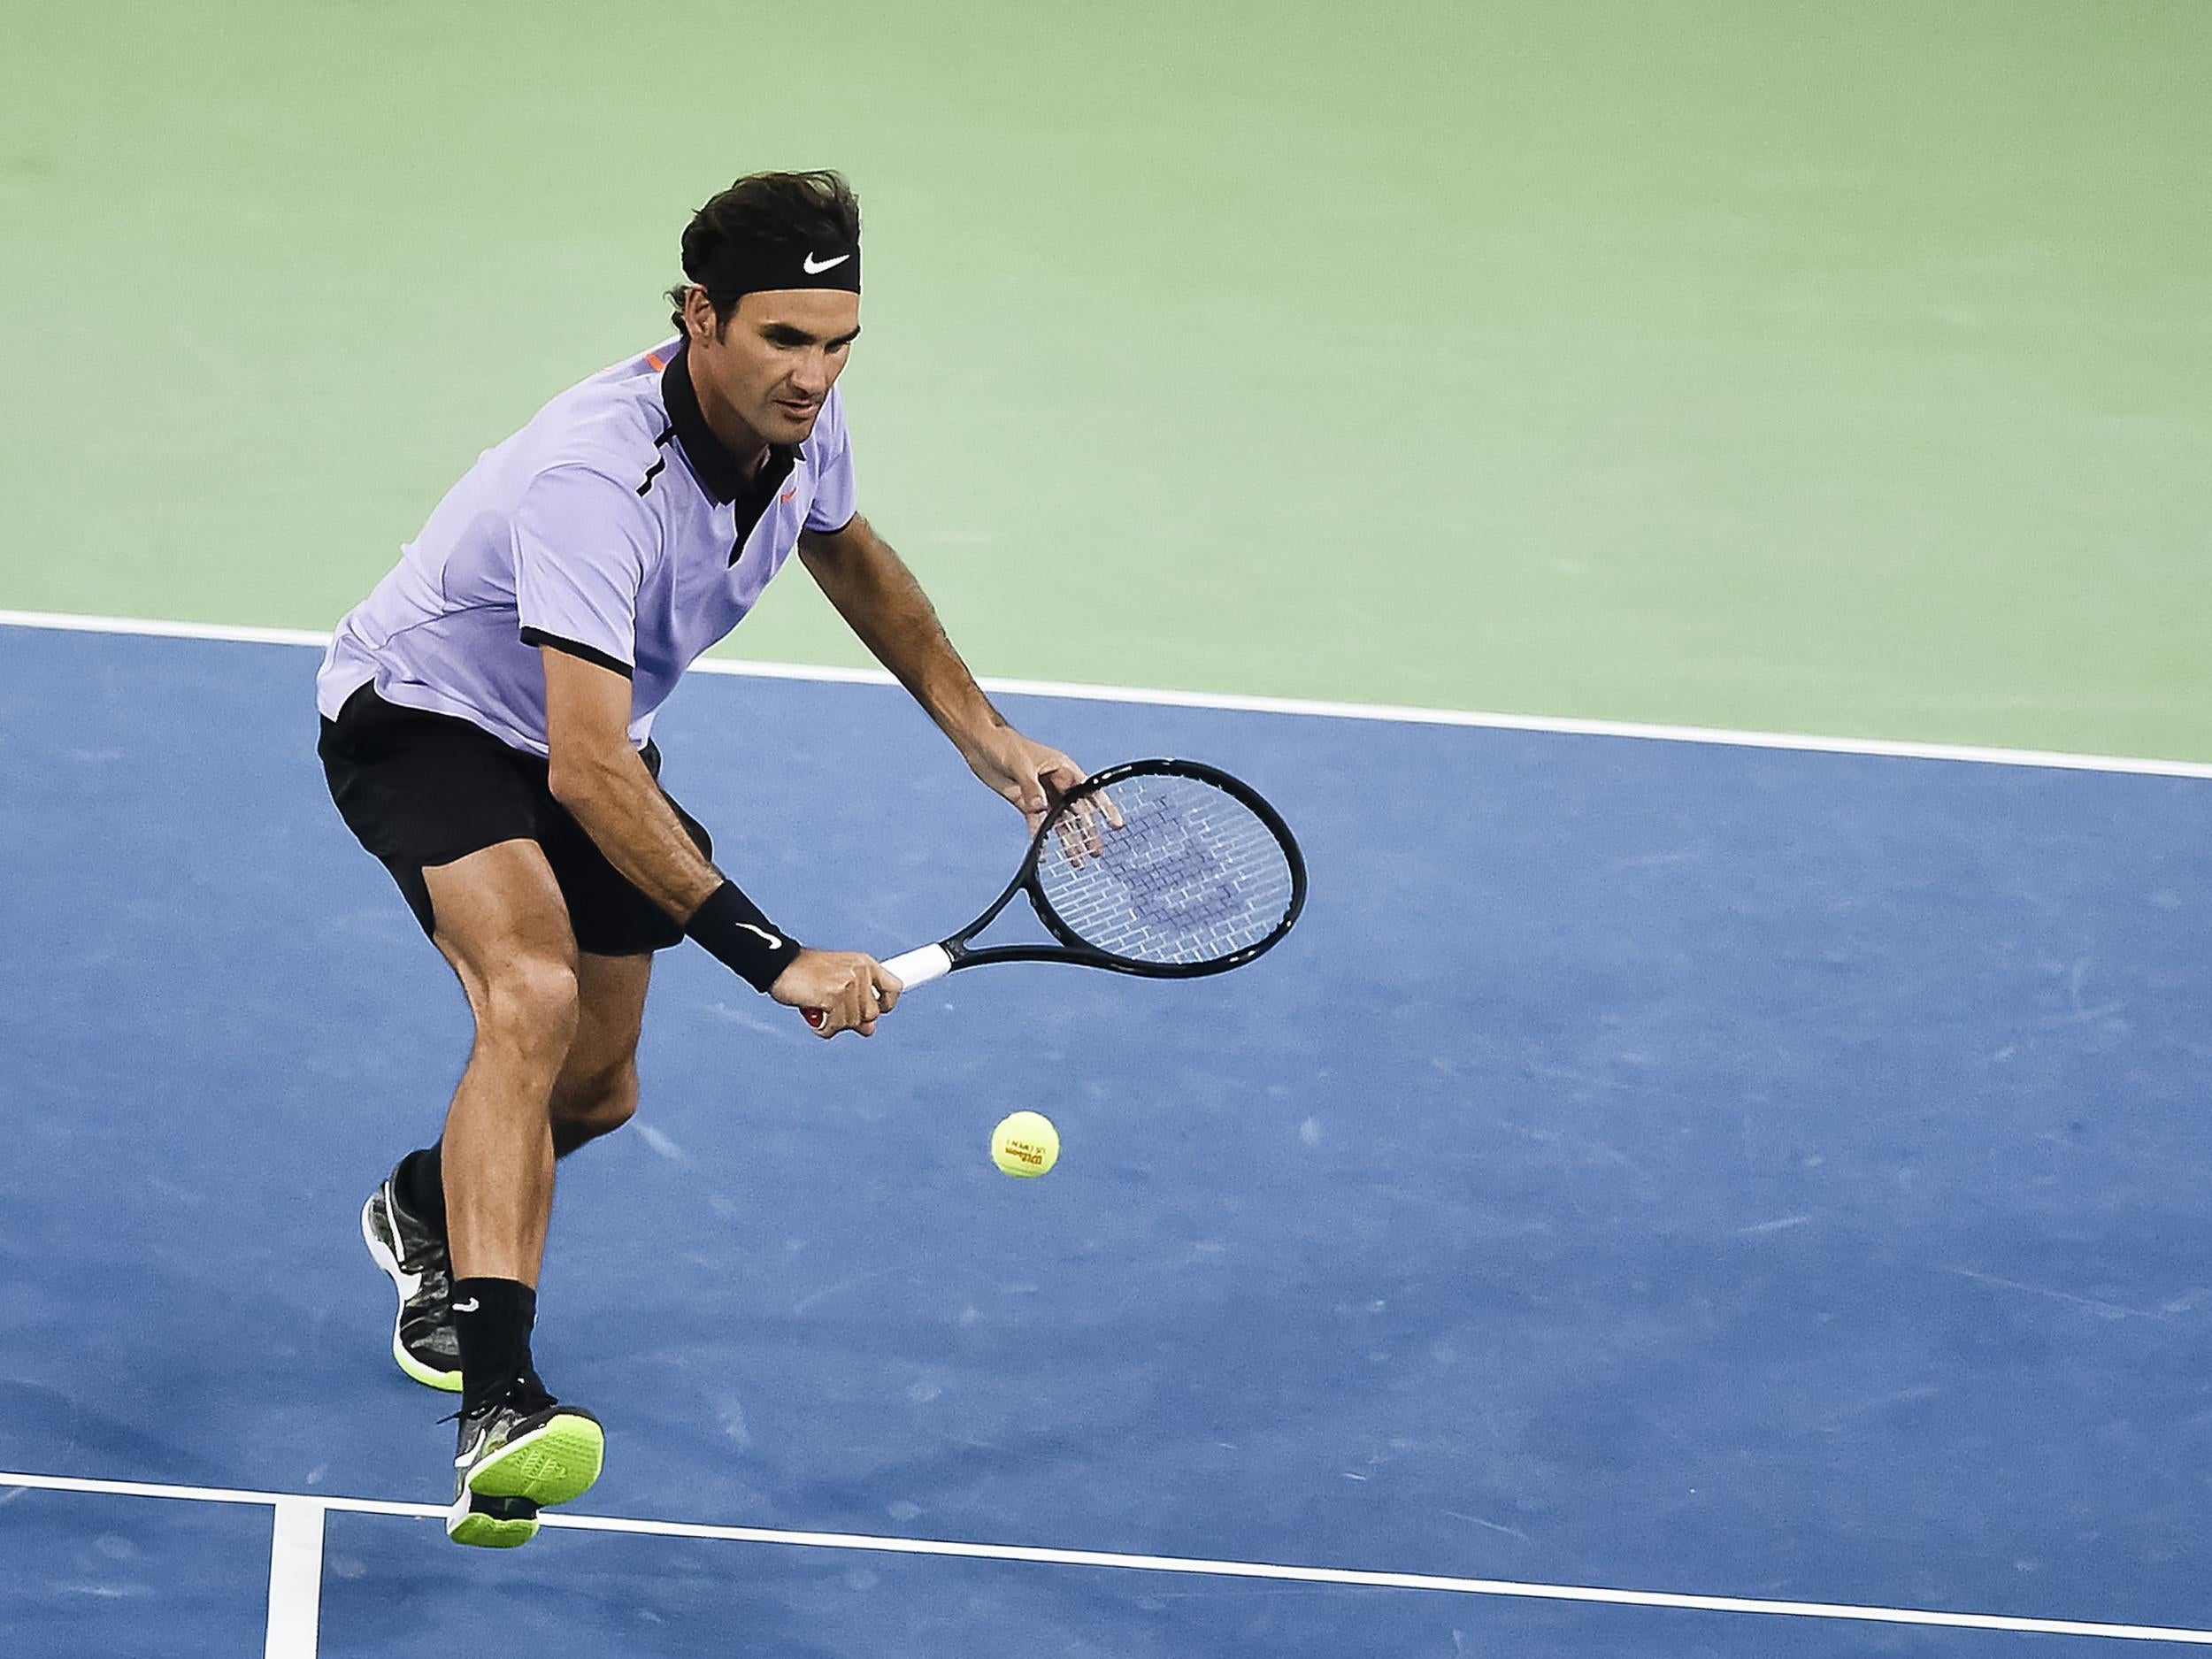 Federer has successfully remodeled his game